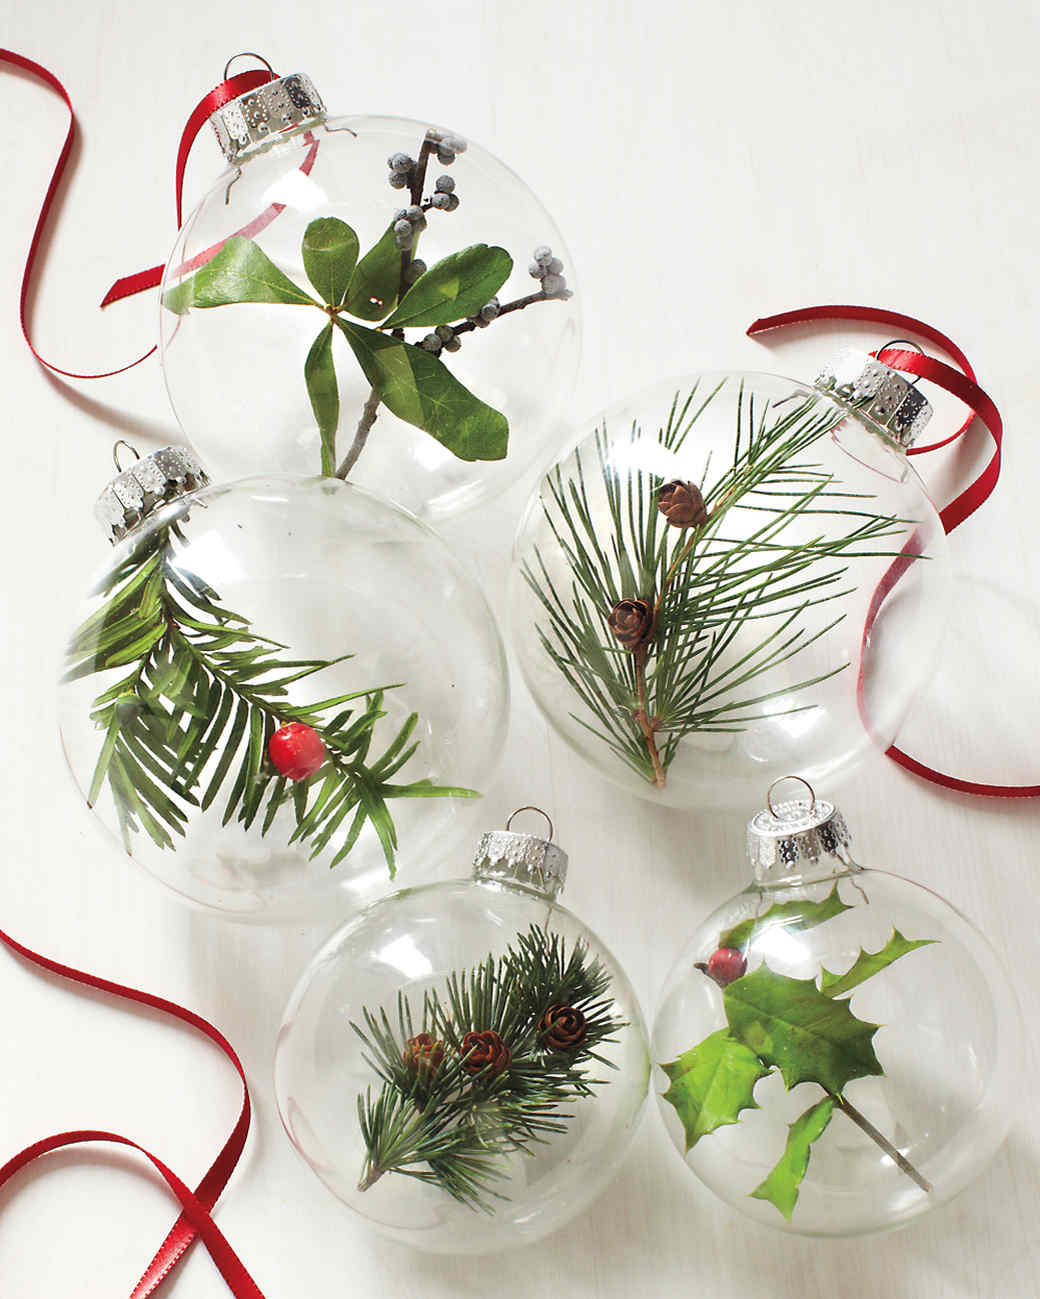 DIY Christmas Ornaments
 20 of Our Most Memorable DIY Christmas Ornament Projects